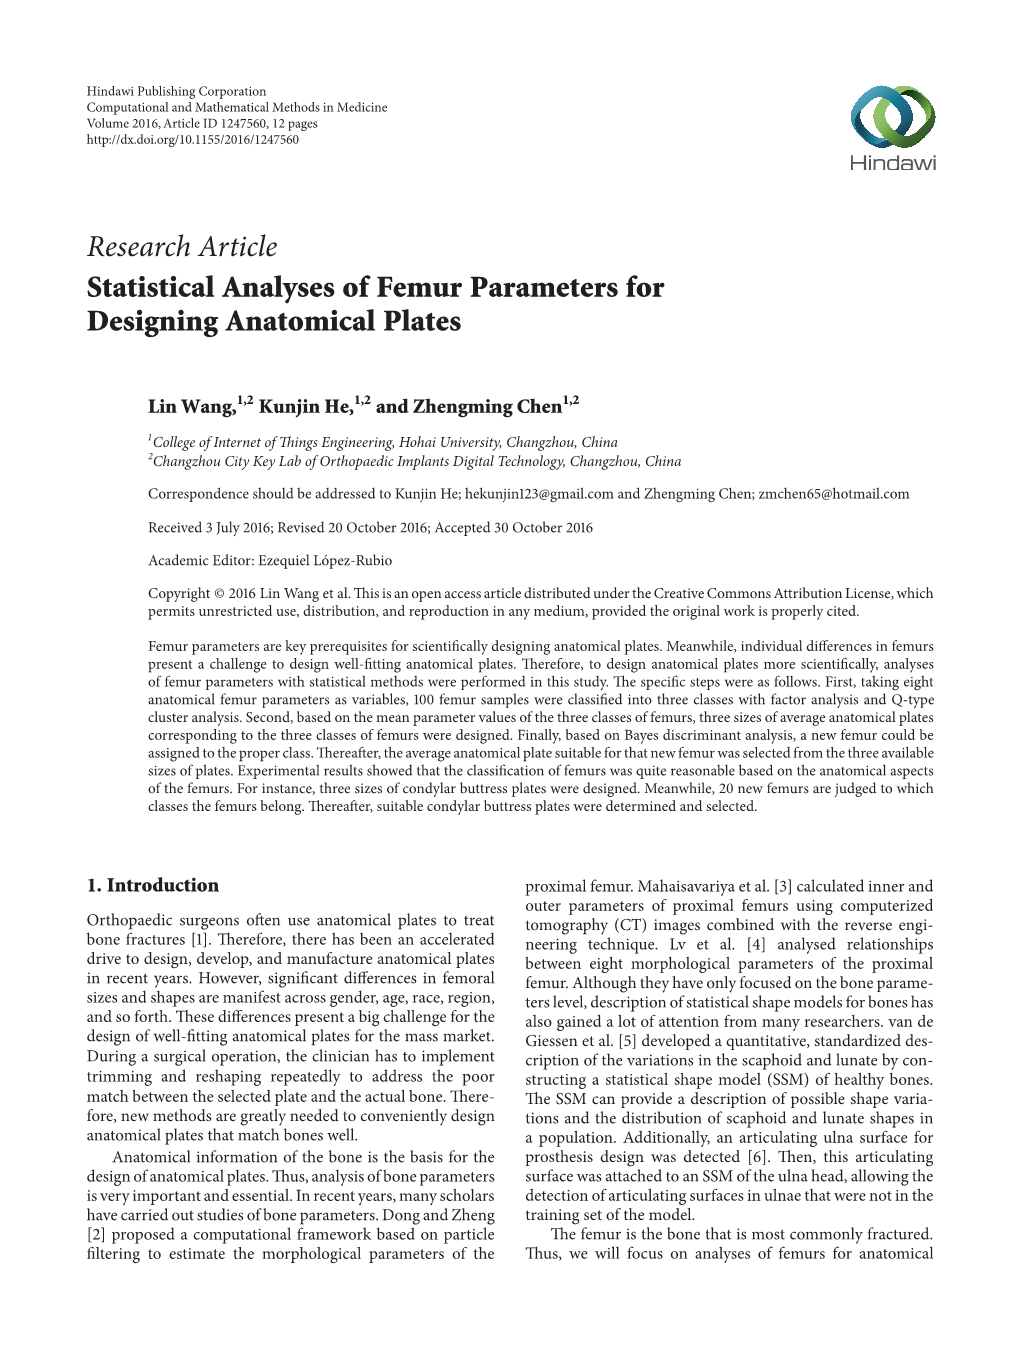 Statistical Analyses of Femur Parameters for Designing Anatomical Plates